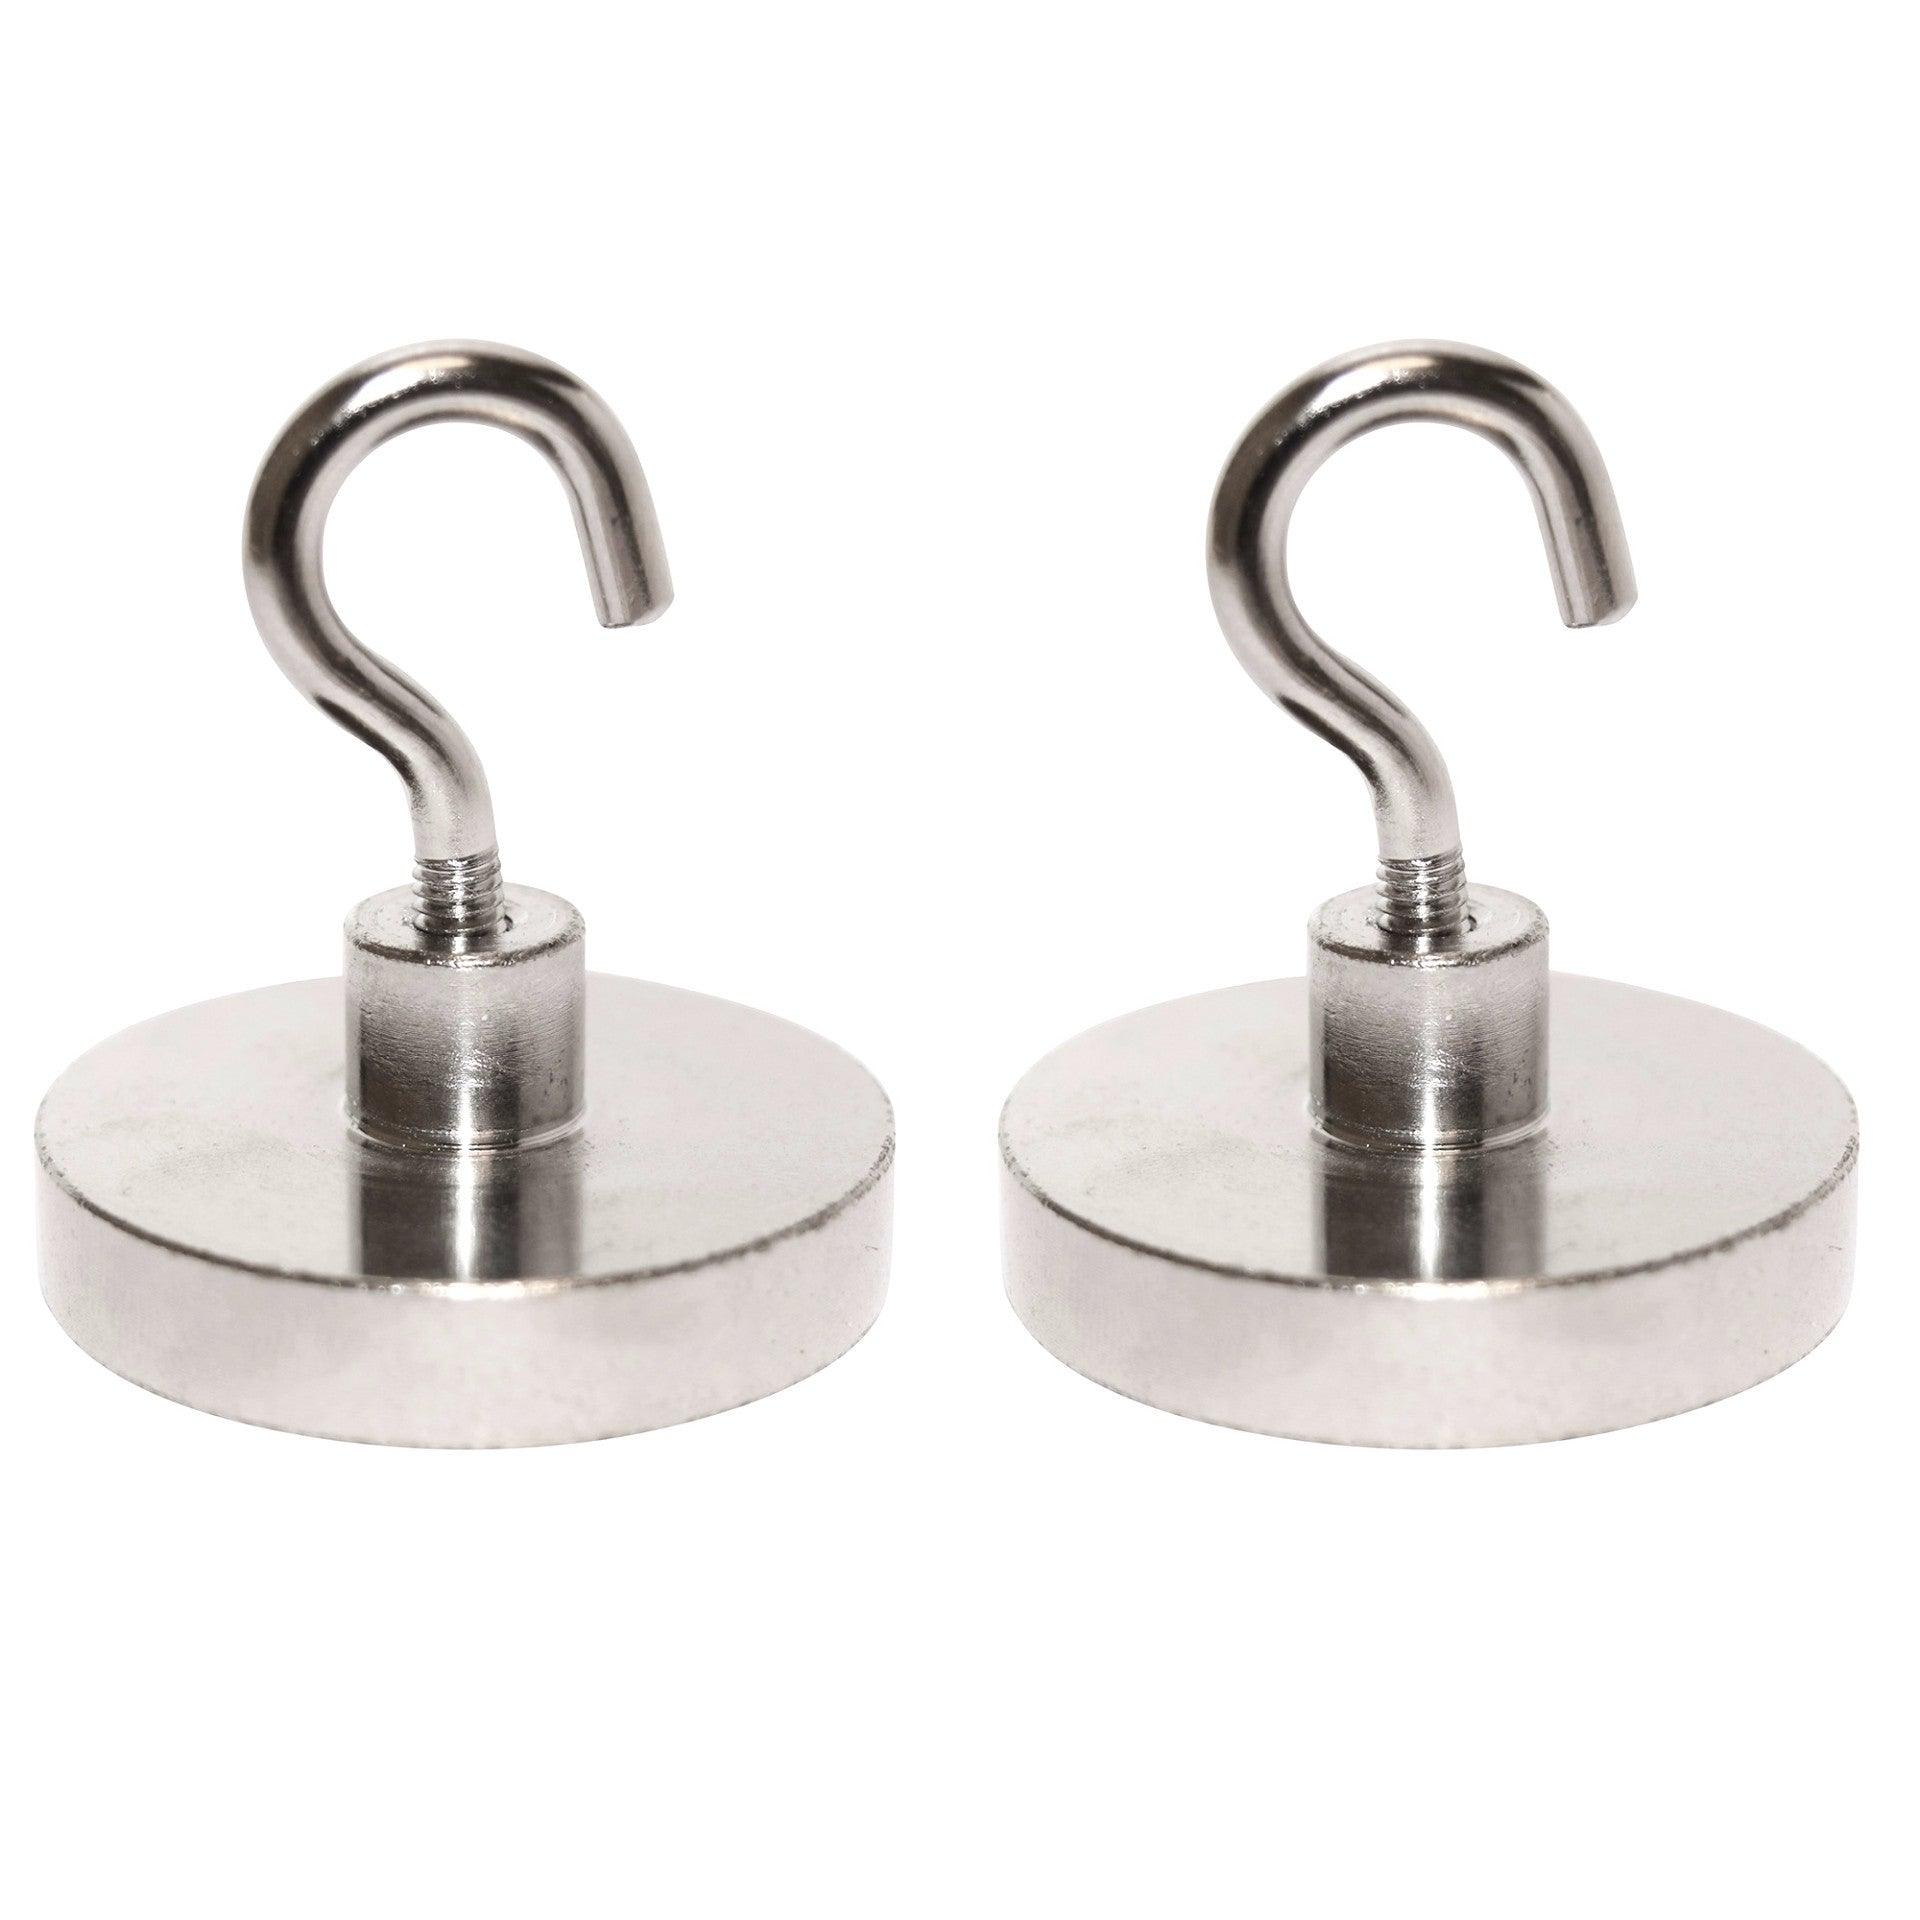 totalElement 55lb Strong Magnetic Neodymium Rare Earth Magnet Hooks, N48 (55 Pounds) (2 Pack)